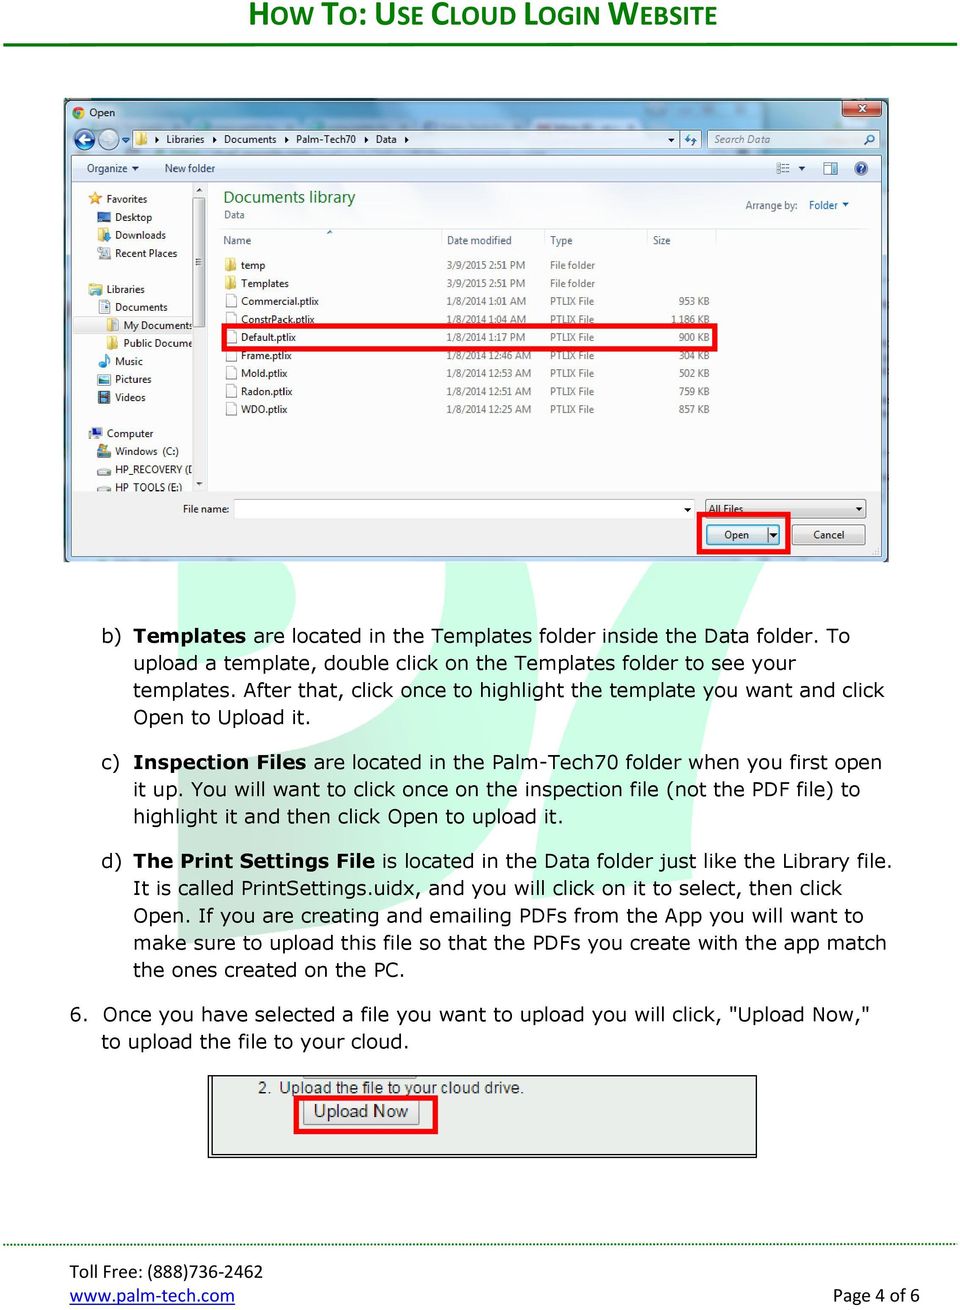 You will want to click once on the inspection file (not the PDF file) to highlight it and then click Open to upload it.